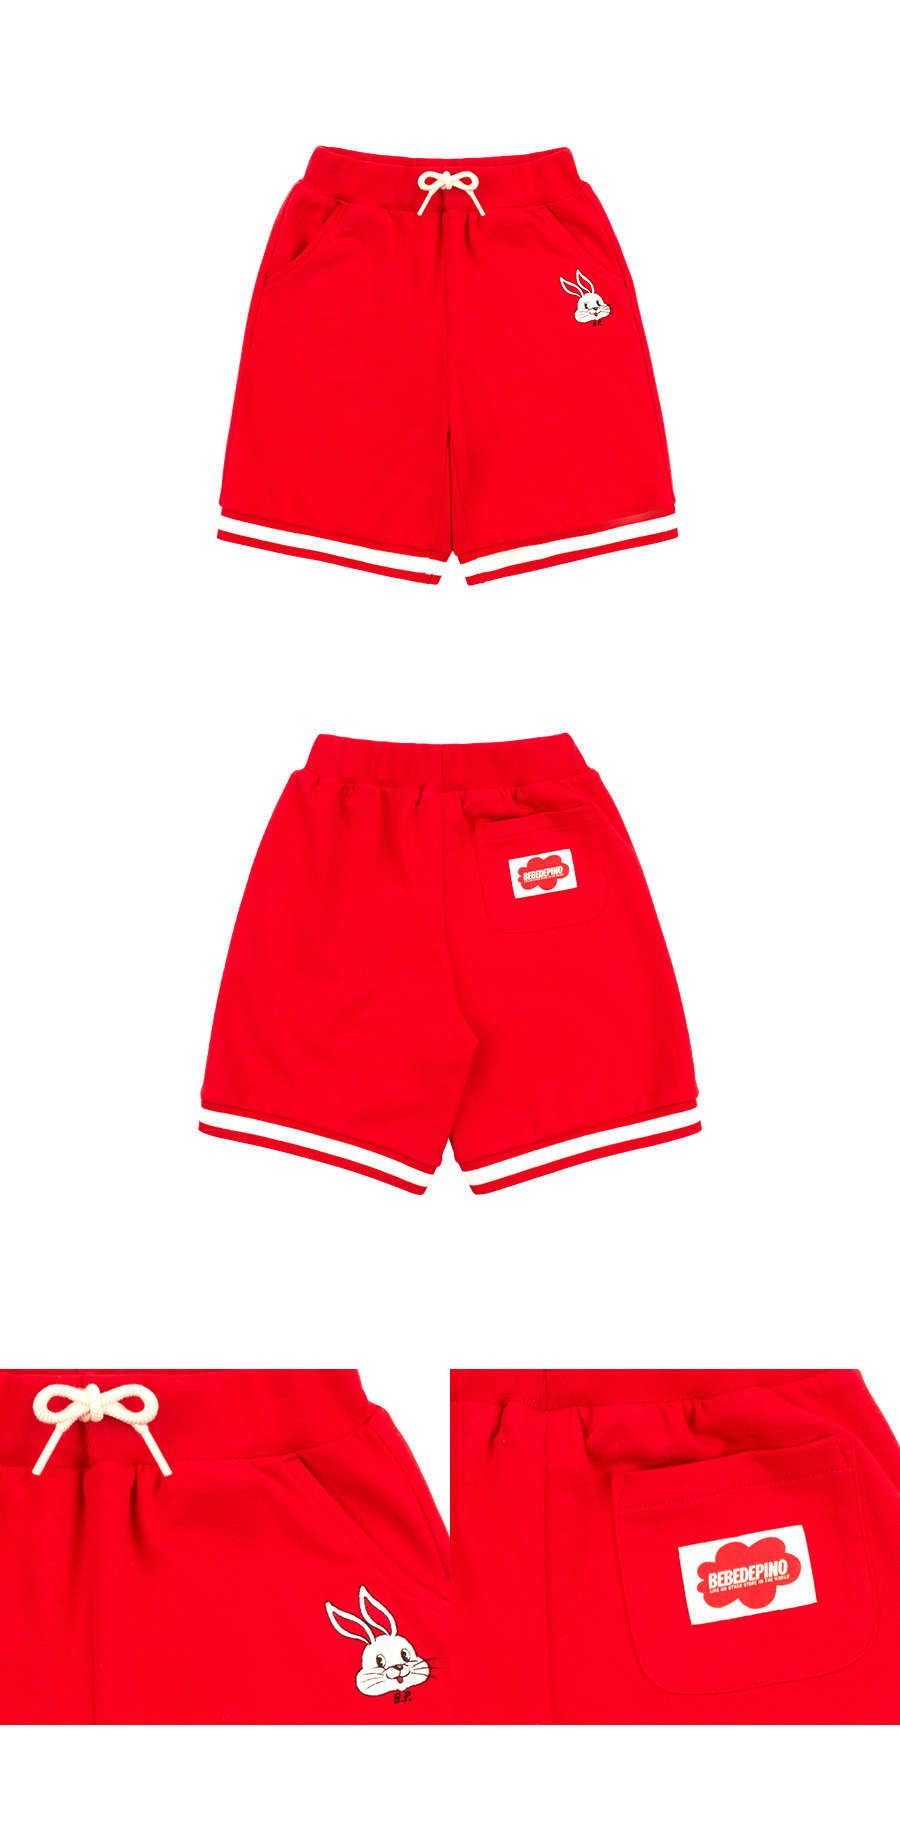 Bunny embroidery jersey shorts 상세 이미지